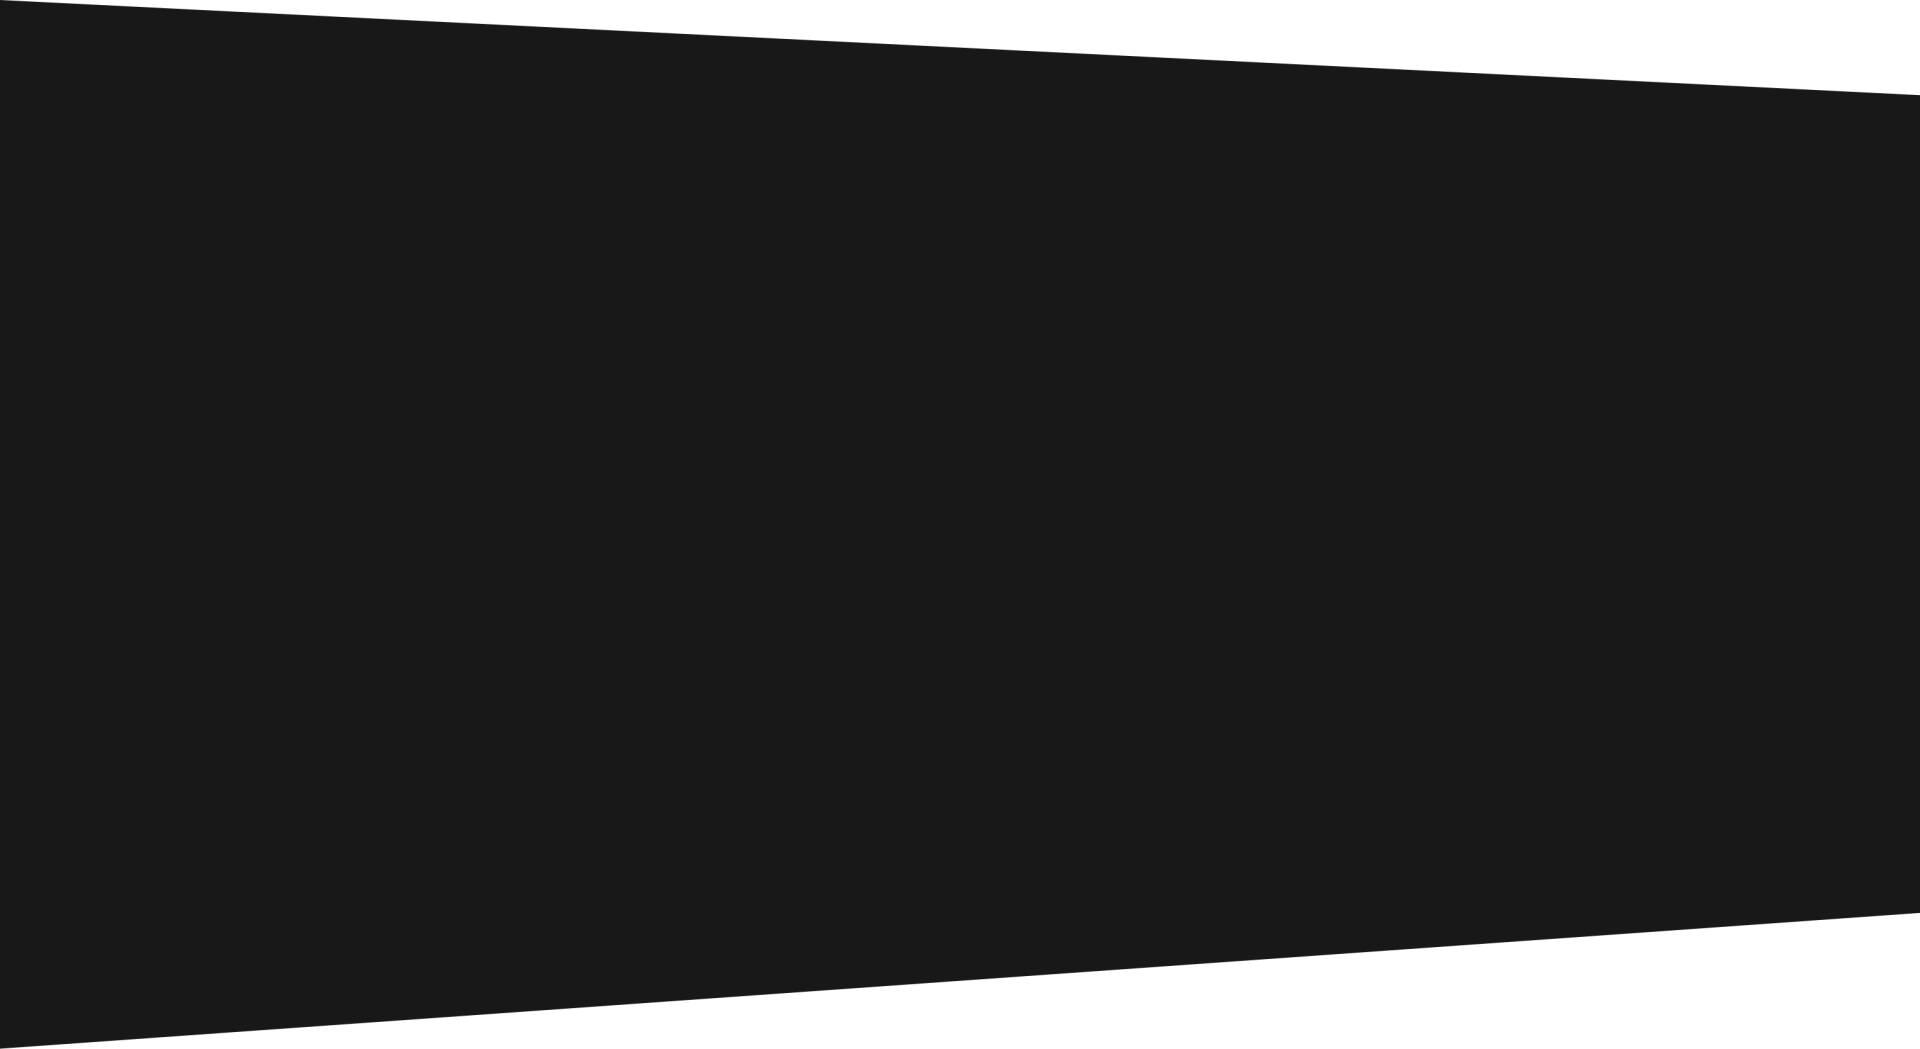 A black rectangle with a white border on a white background.